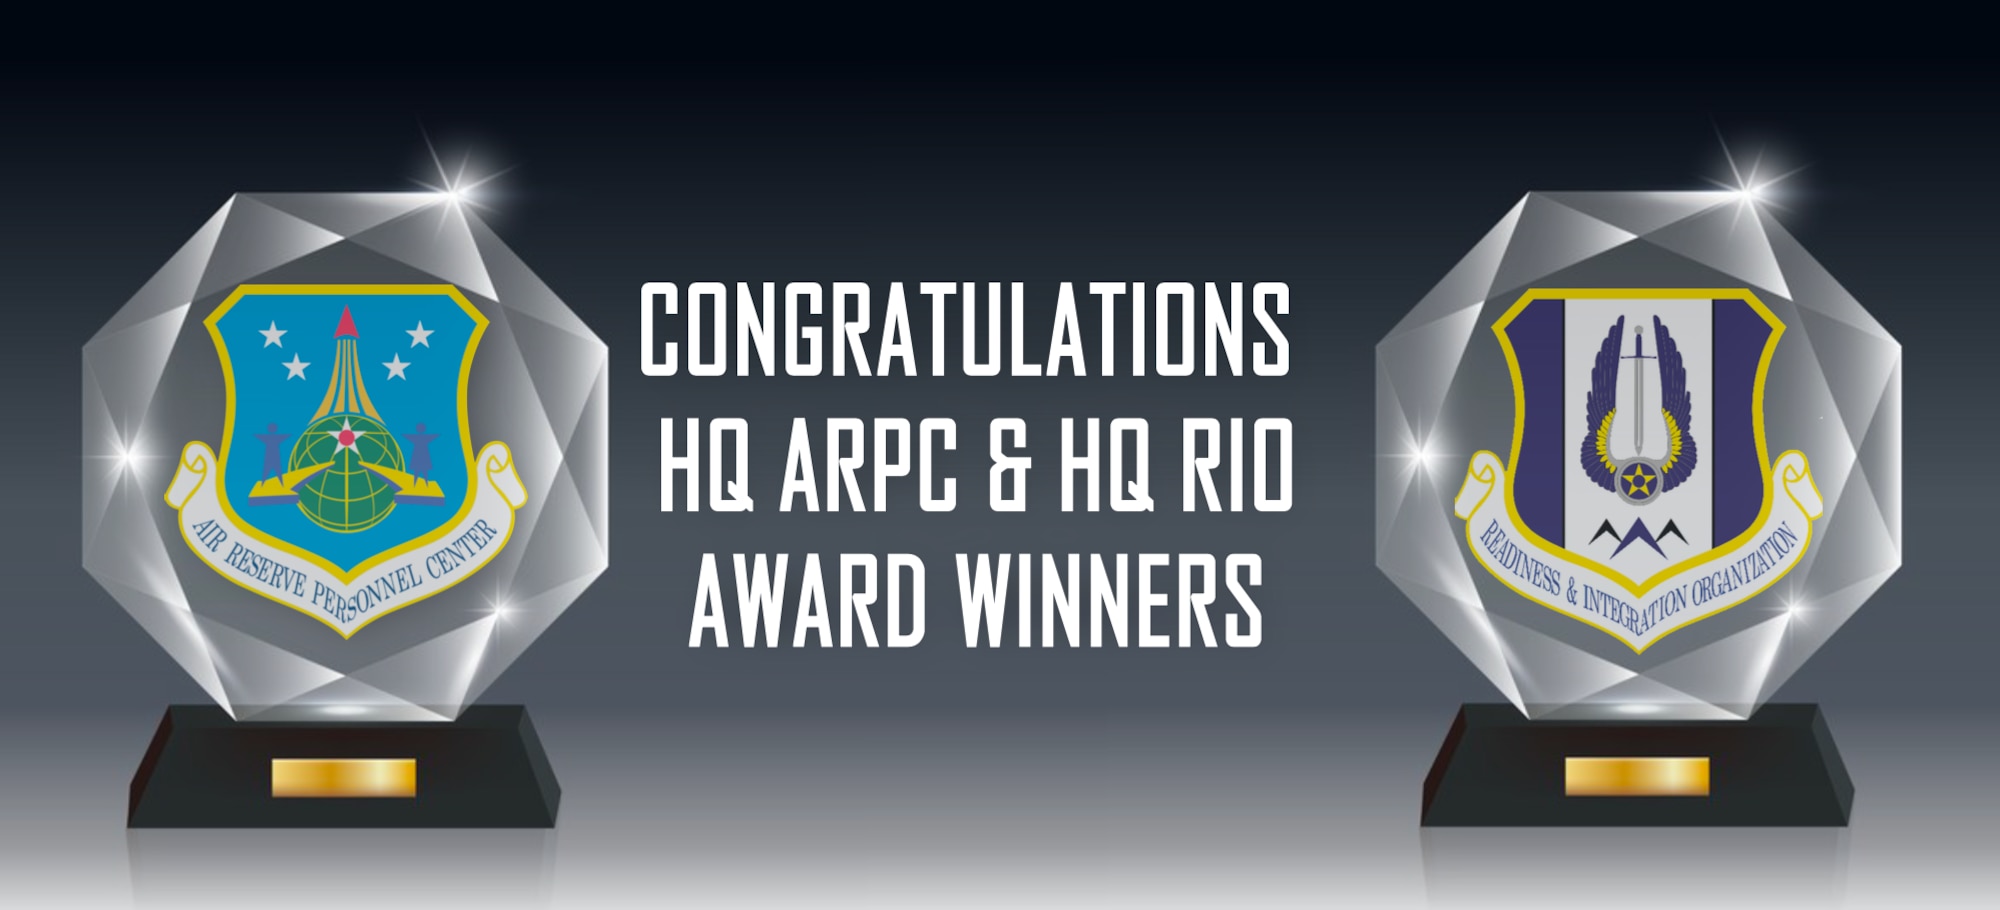 HQ ARPC and HQ RIO Earns 11 in 2020 A1 Awards (U.S. Air Force Graphic by Tech. Sgt. Della Creech)